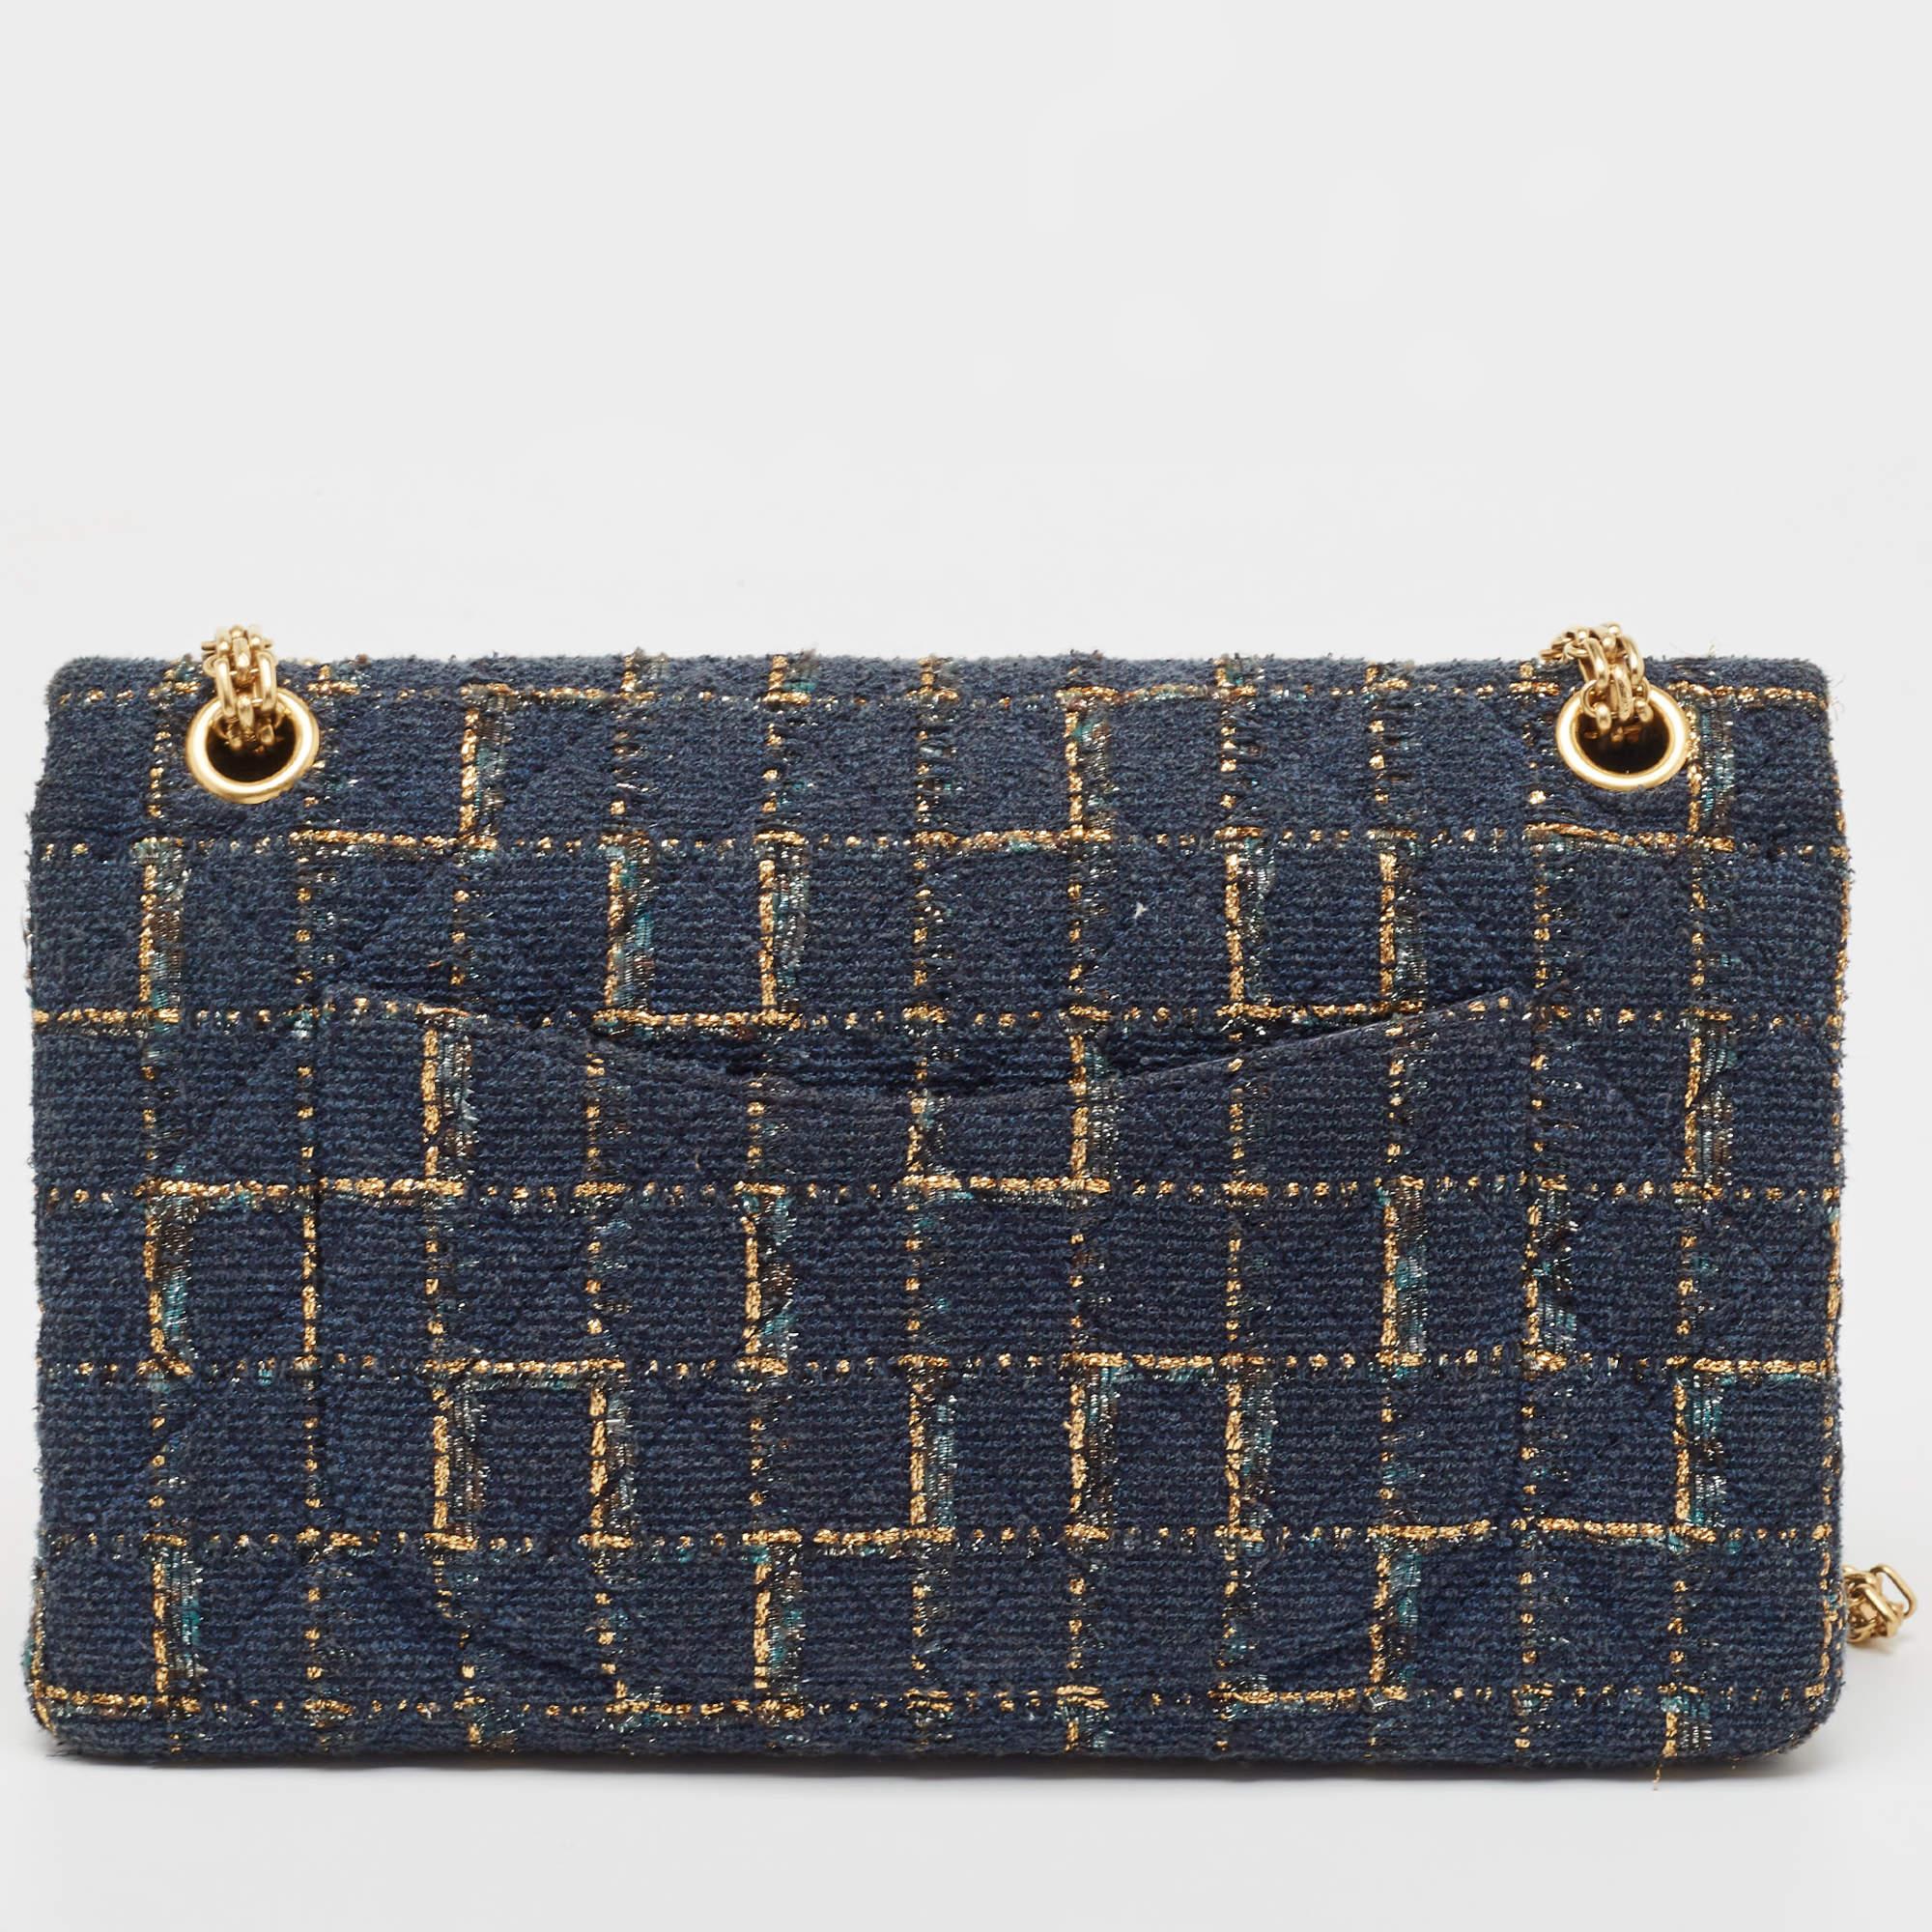 Women's Chanel Blue/Gold Tweed Reissue 2.55 Icons Mademoiselle Double Flap Bag